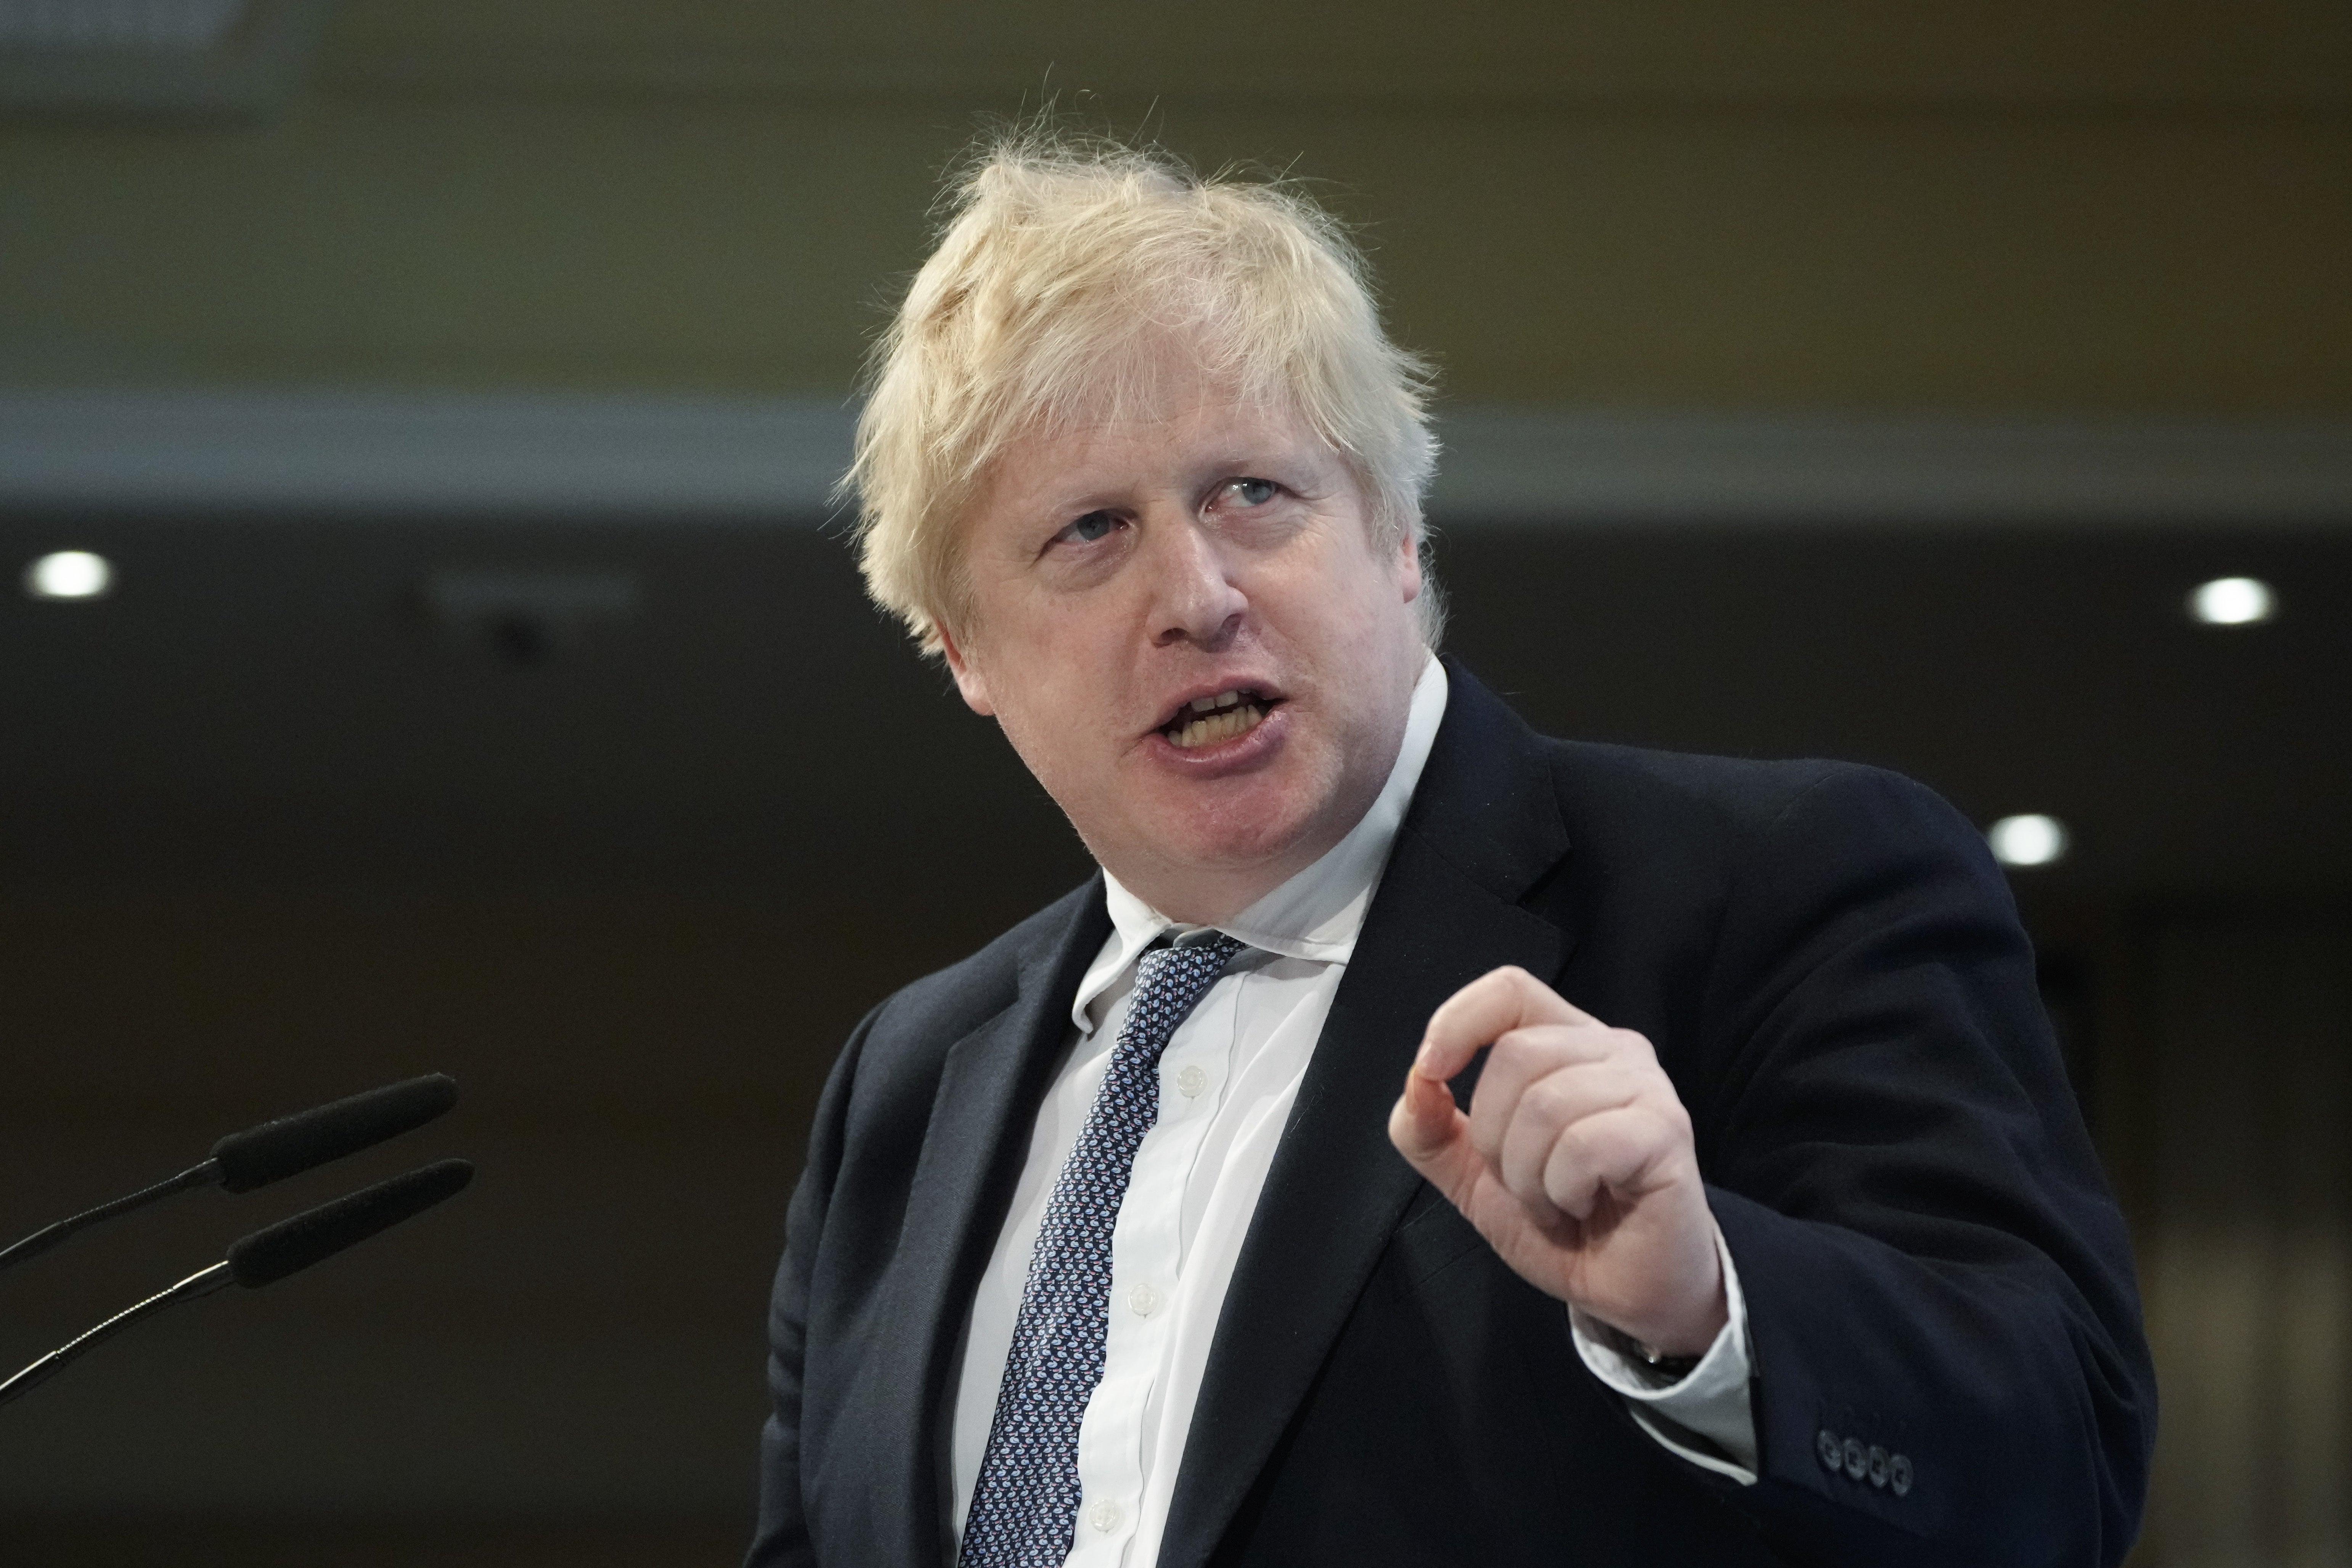 Prime Minister Boris Johnson has addressed world leaders at the Munich Security Conference regarding a possible conflict in Ukraine (Matt Dunham/PA)